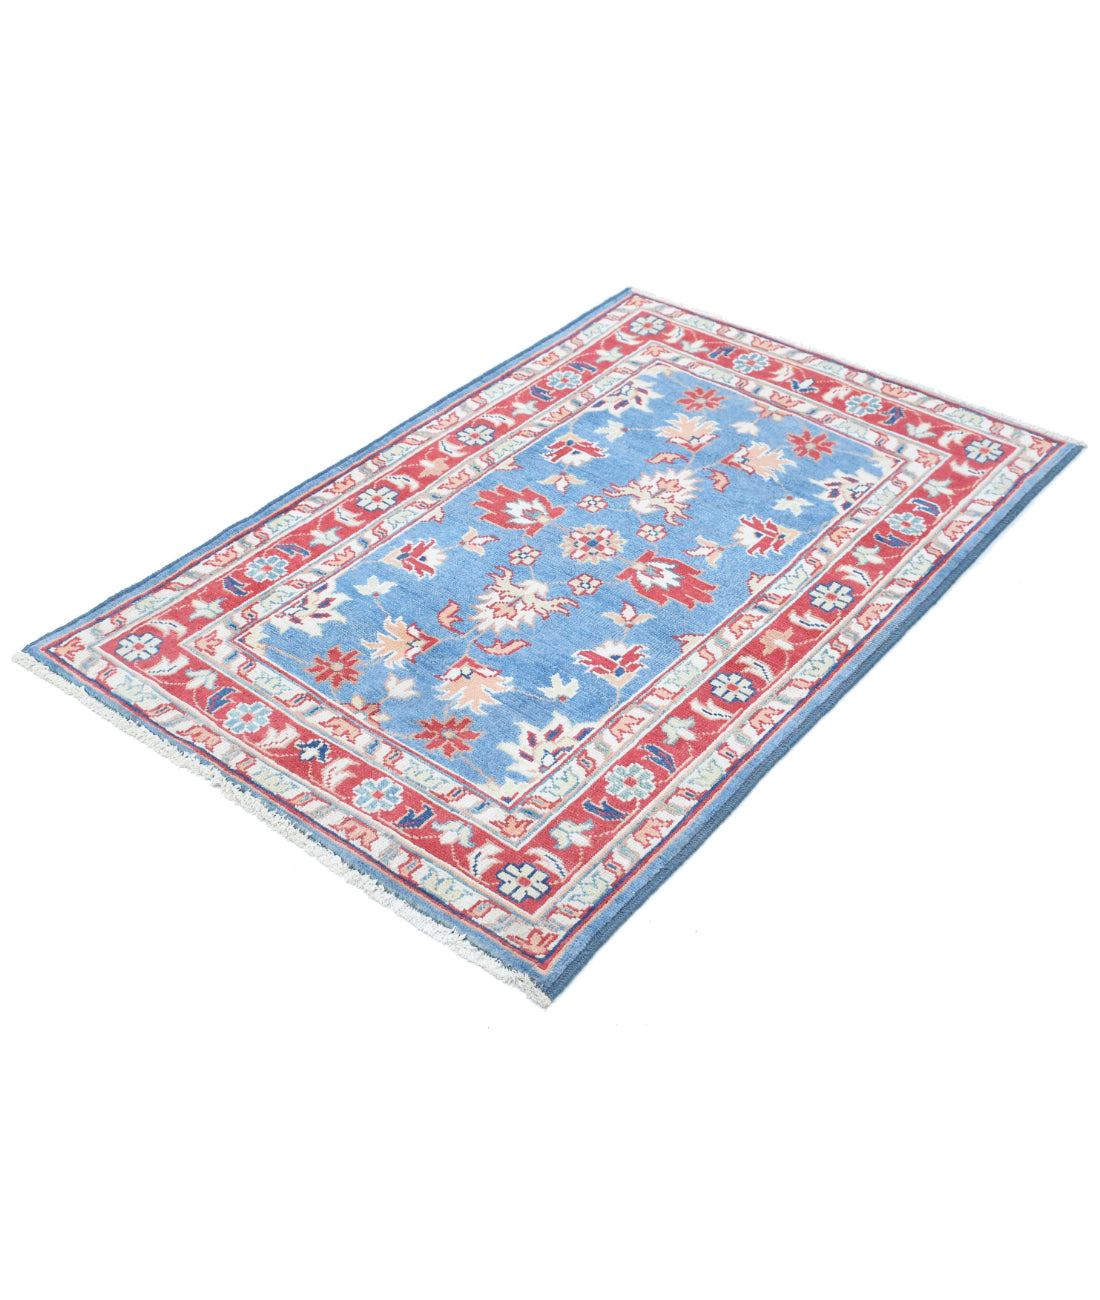 Ziegler 3'0'' X 4'9'' Hand-Knotted Wool Rug 3'0'' x 4'9'' (90 X 143) / Blue / Red